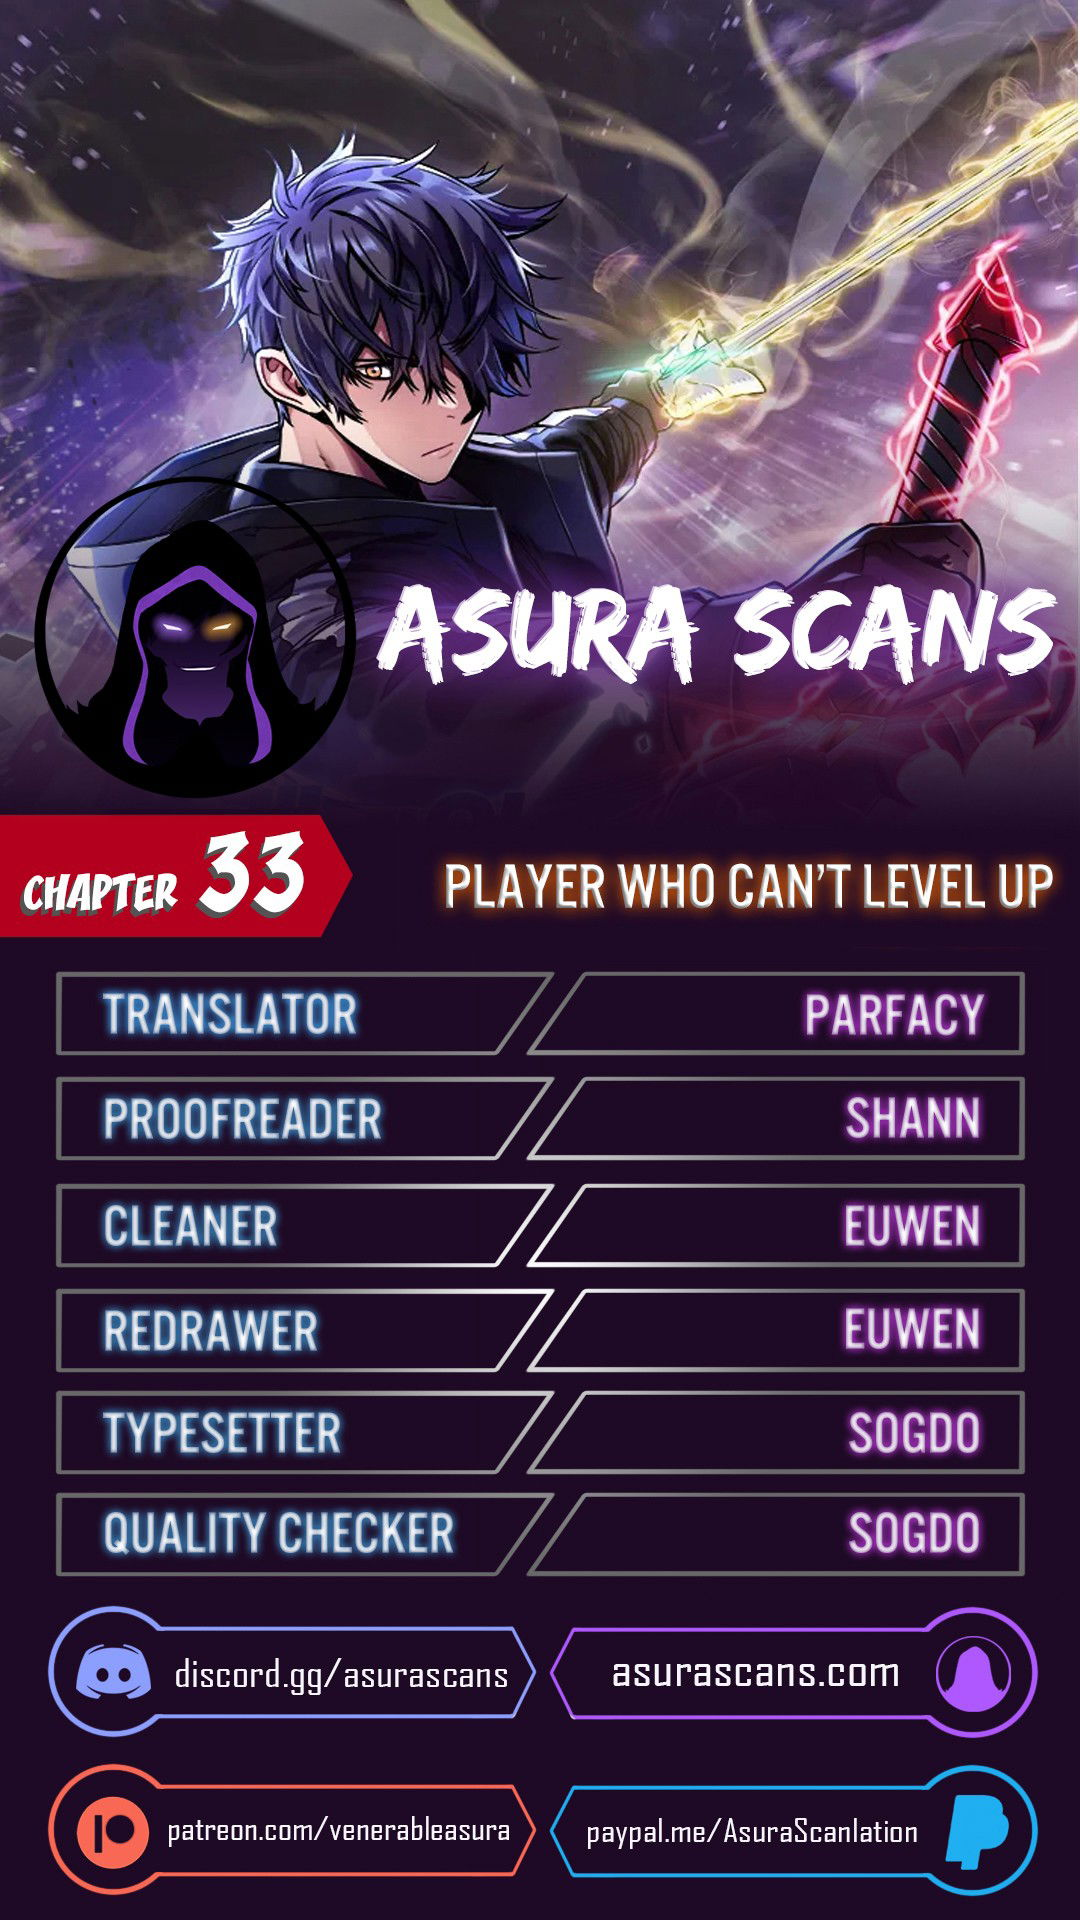 player-who-cant-level-up-chap-33-0